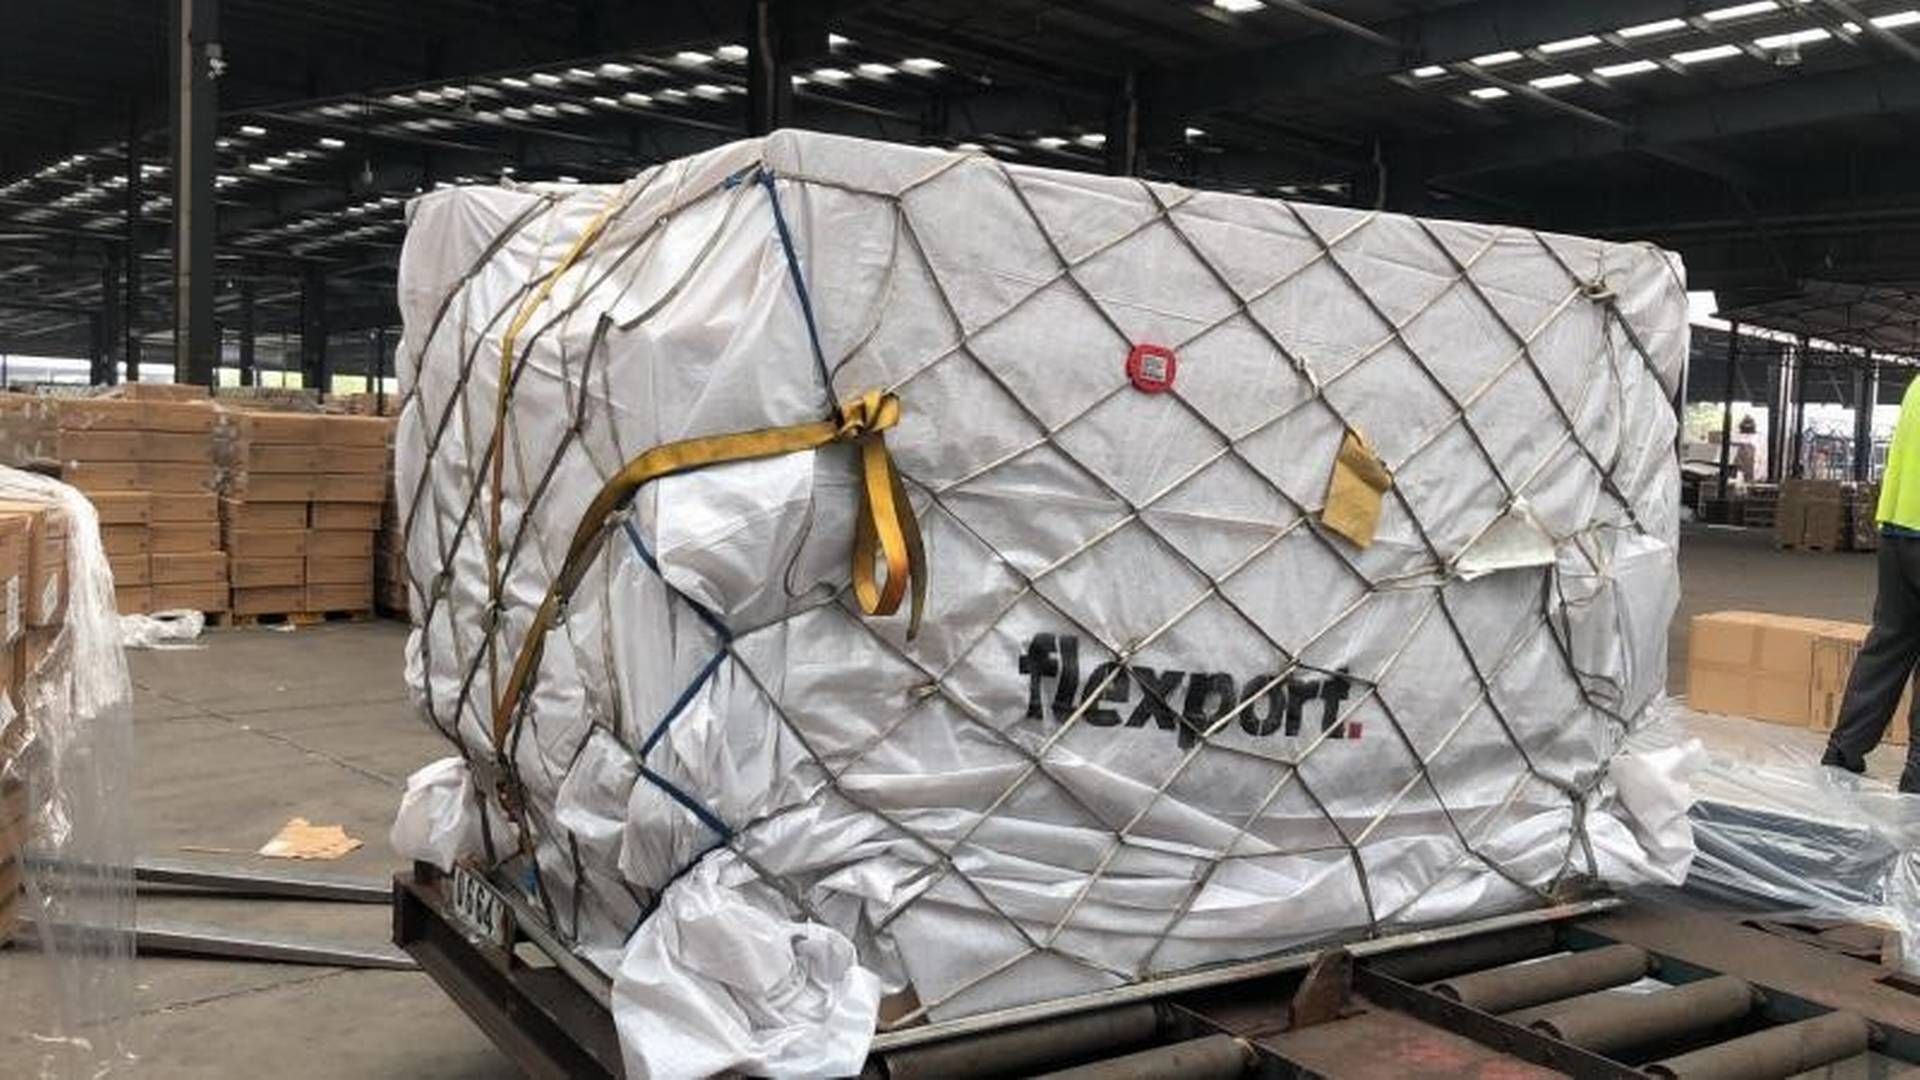 ”We would like to create what I like to call a center of gravity where customers could book, track and deliver all of their freight shipments,” says Konstantina Georgaki, senior director, chief of staff and business operations at Flexport. | Photo: Flexport/pr